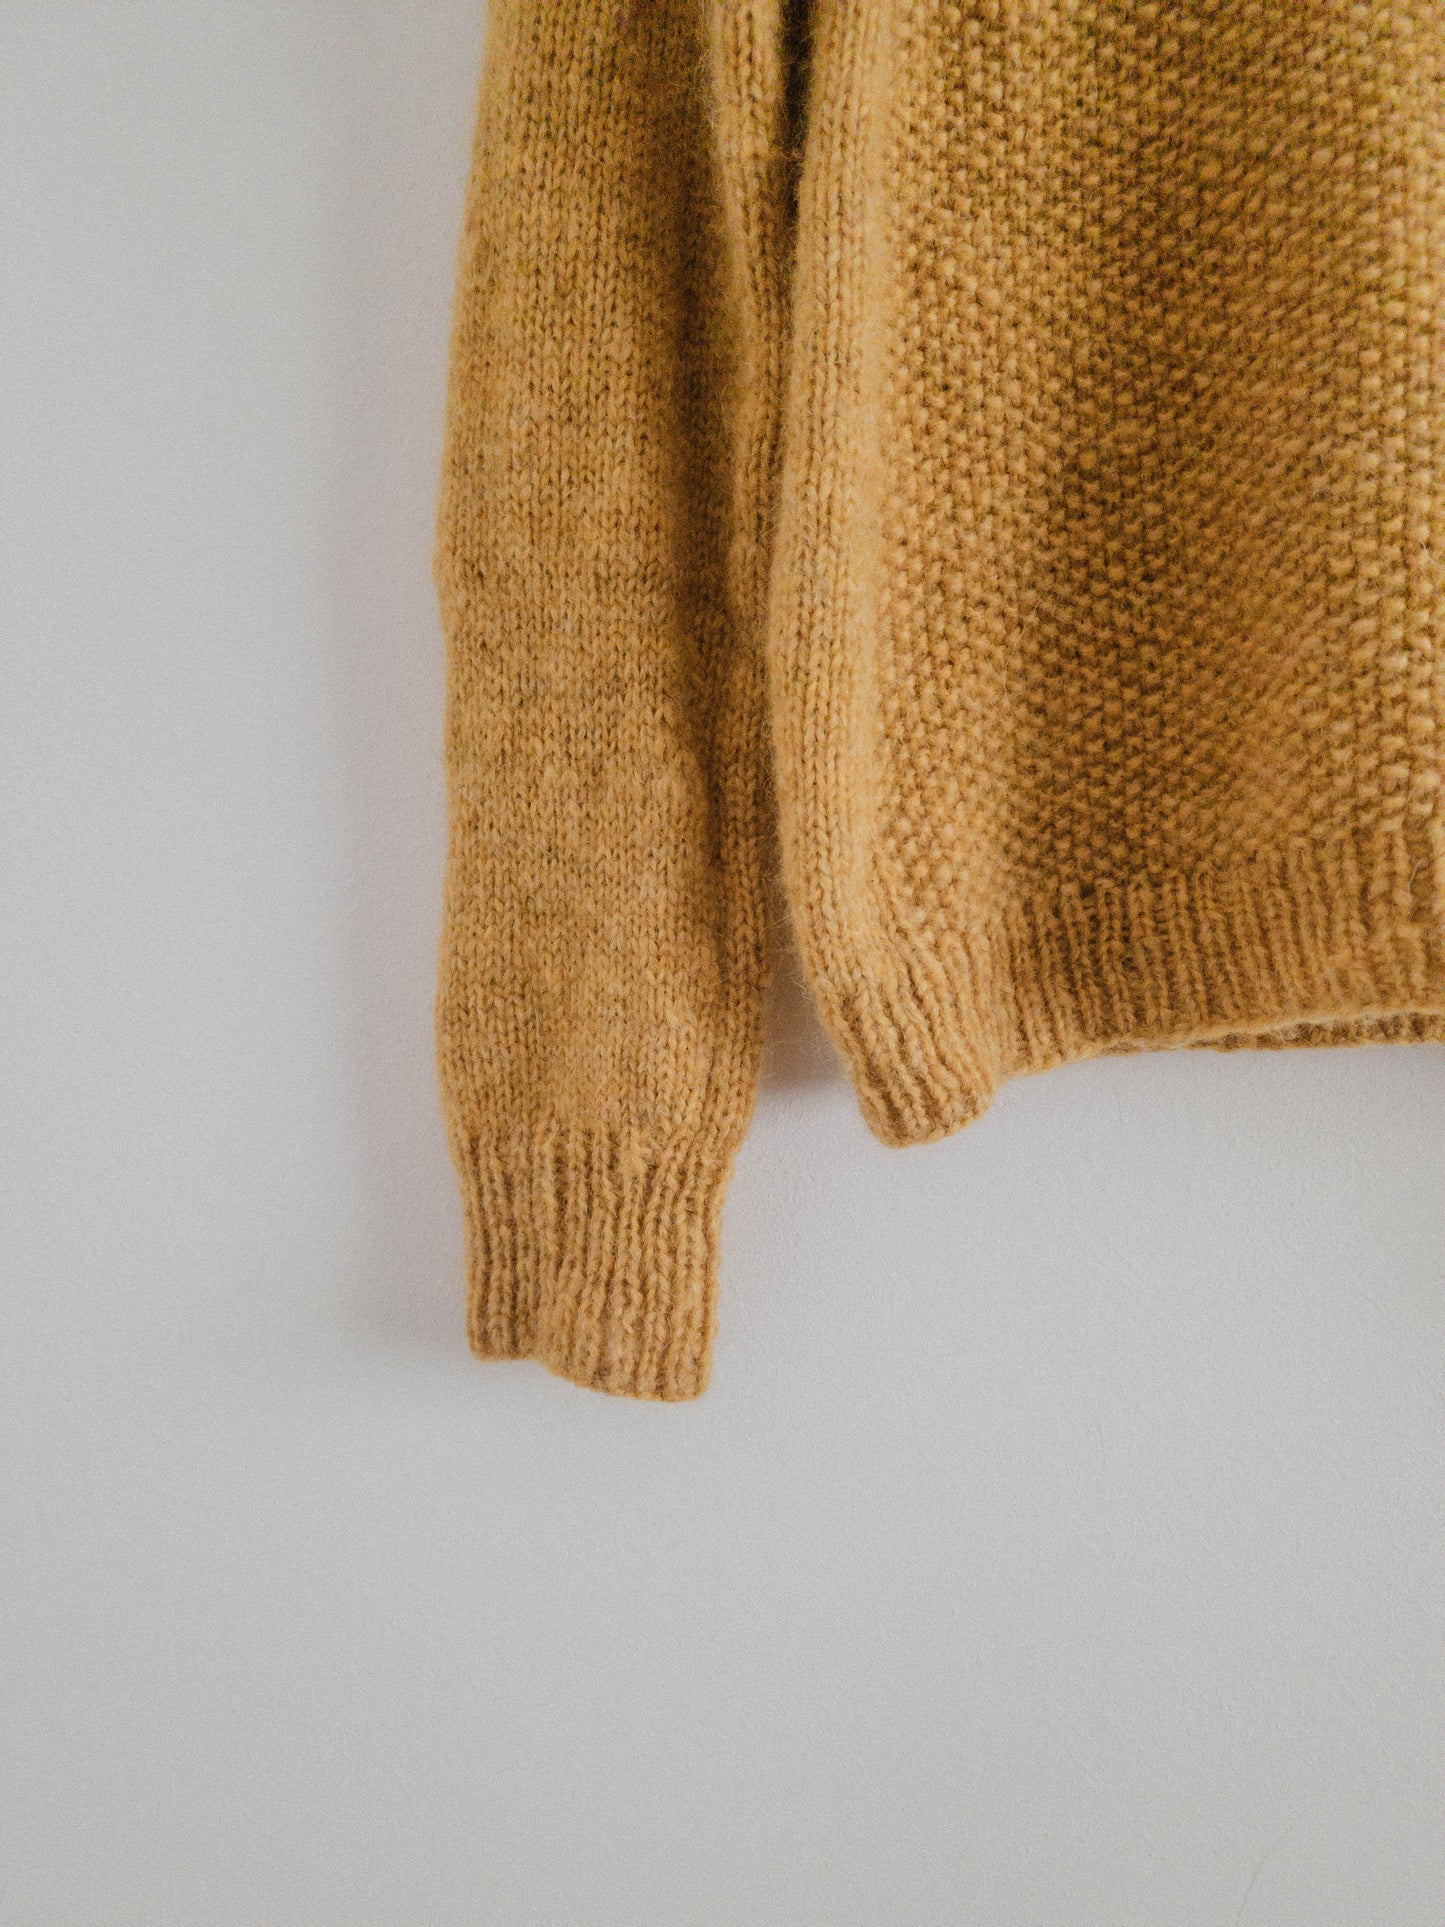 Close-up of the lower sleeve and hem of the hand-knit 'Before Fall Sweater' by Ulven, amber-yellow, showcased on a black hanger against a white backdrop. The intricate details of the unspun Nutiden yarn and the textured seed stitch pattern are highlighted.